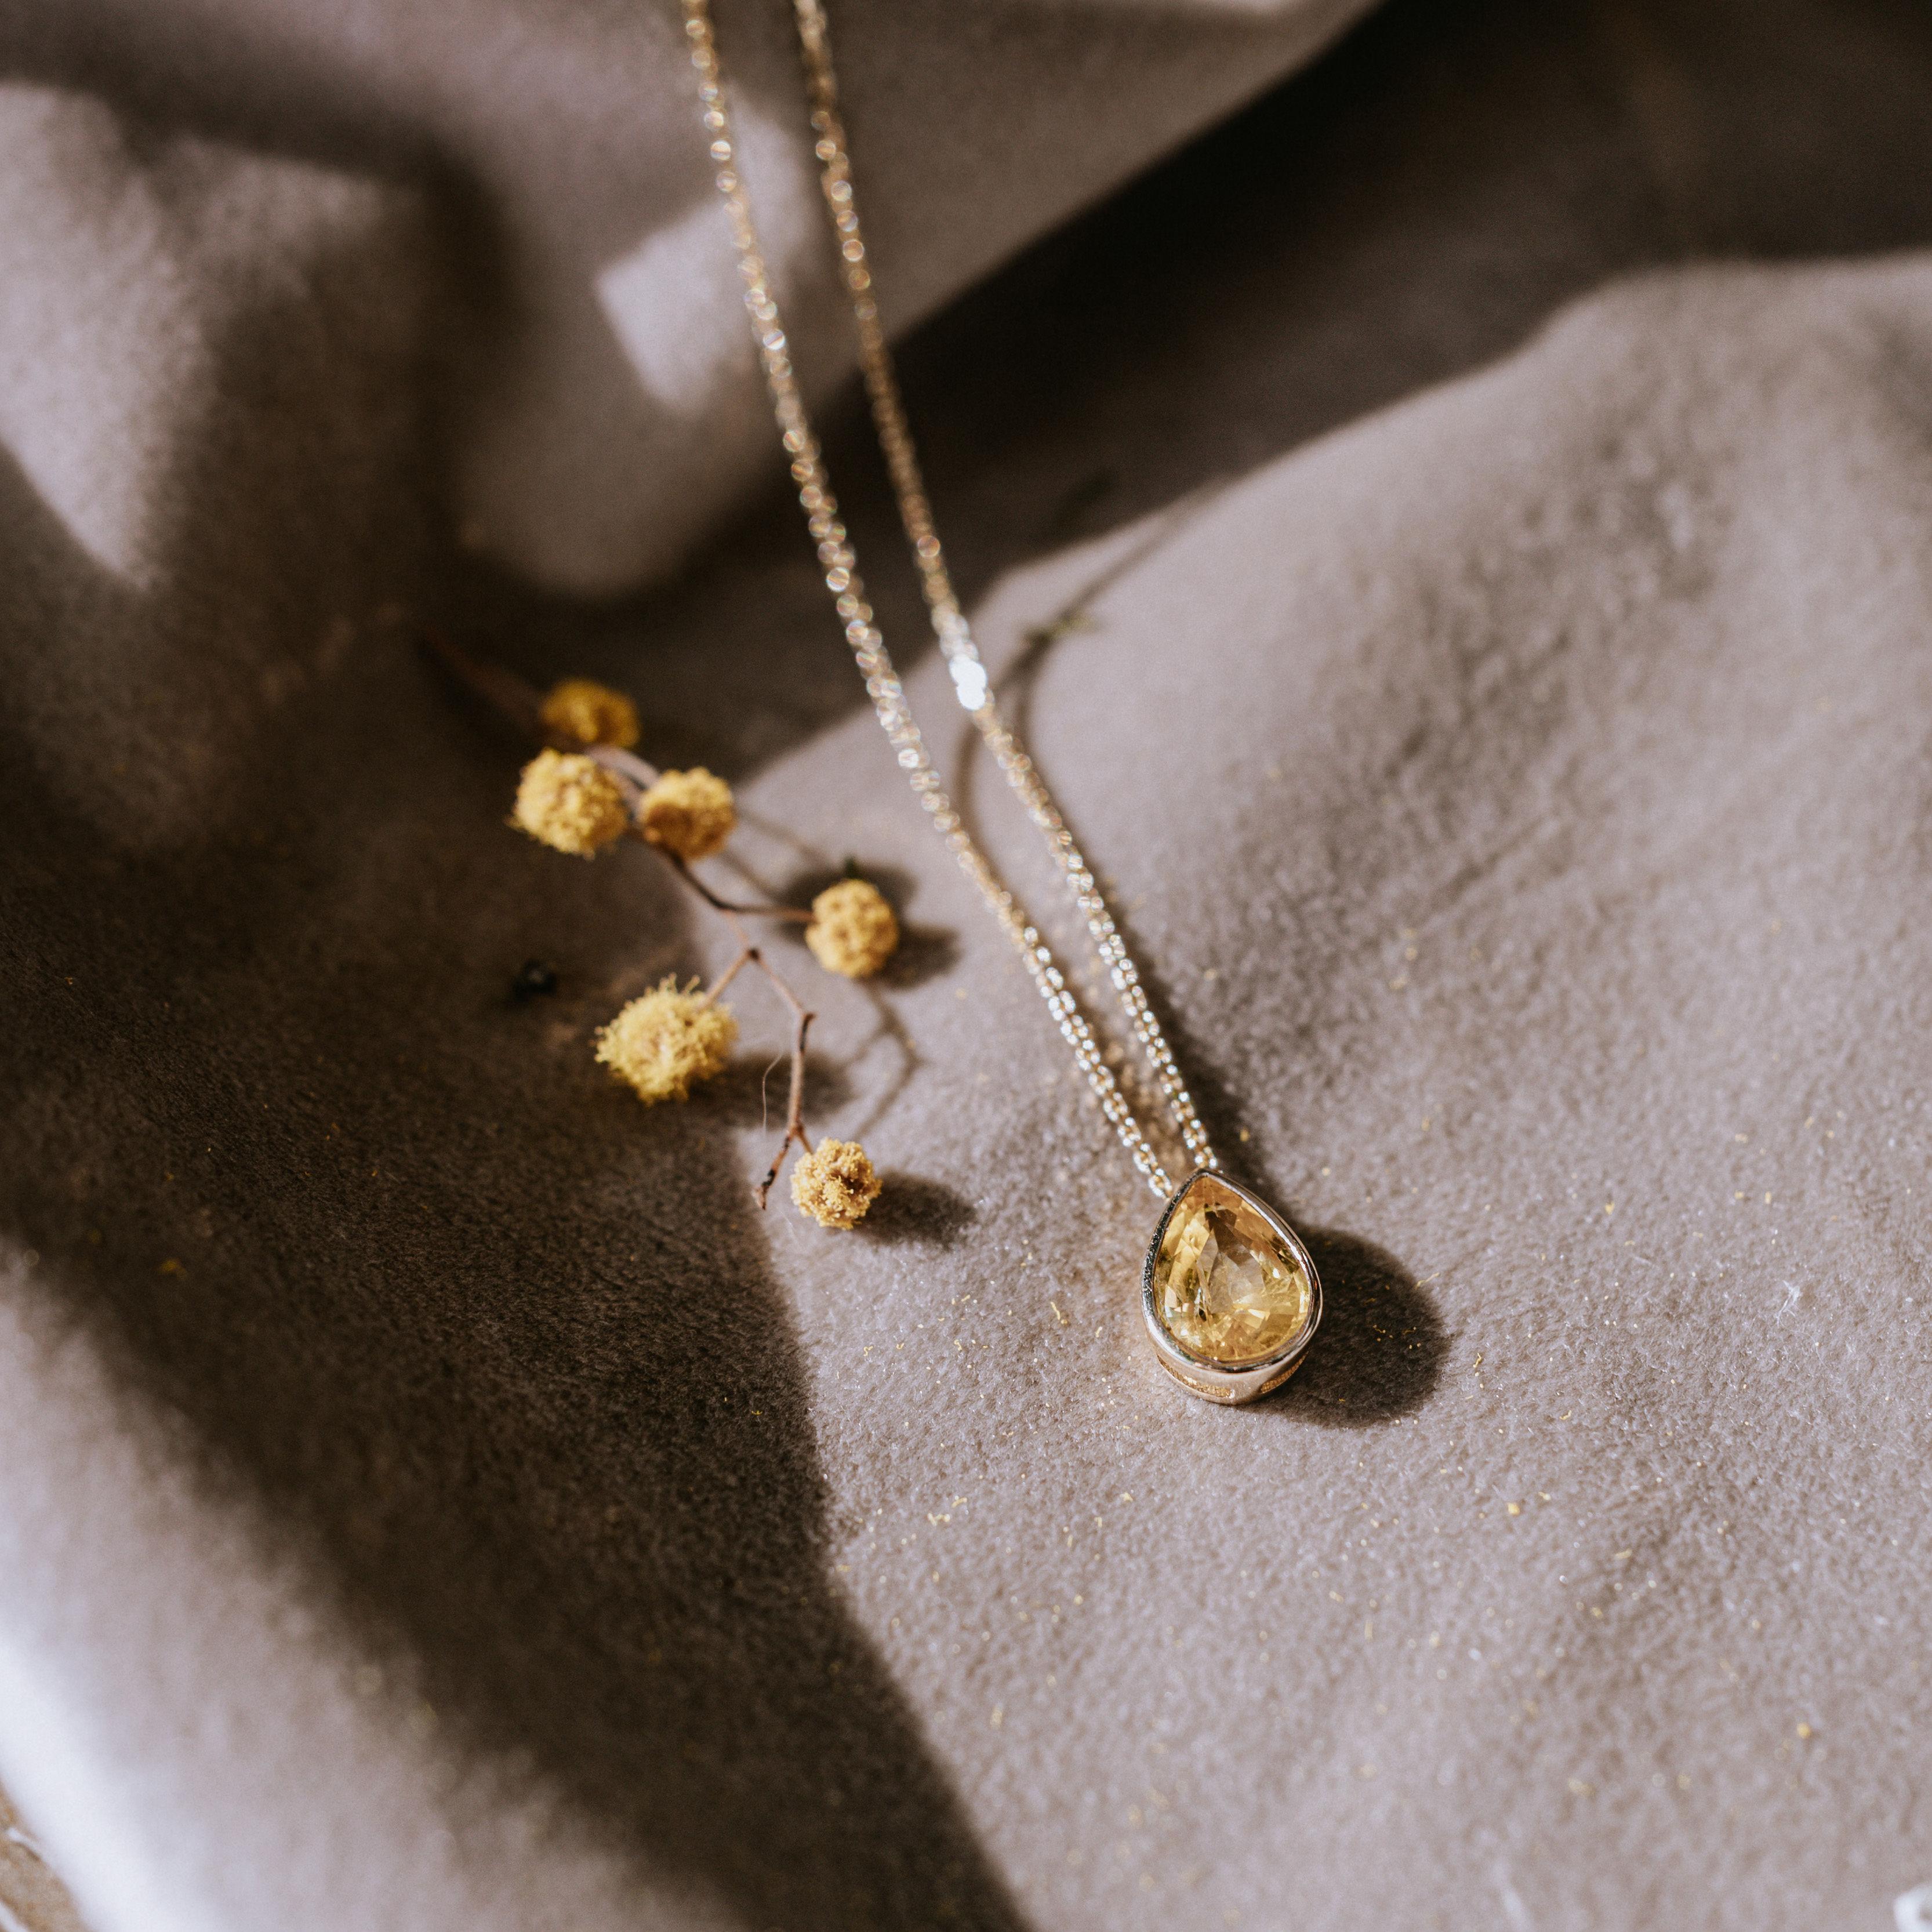 Necklace in 14k yellow gold with 1.71 ct natural yellow sapphire (9.55 x 6mm, pear-cut). Chain 16 inches (can be extended by request).
This necklace reminds about warm summer days, white linen dresses and salty smell of the sea in Ibiza.